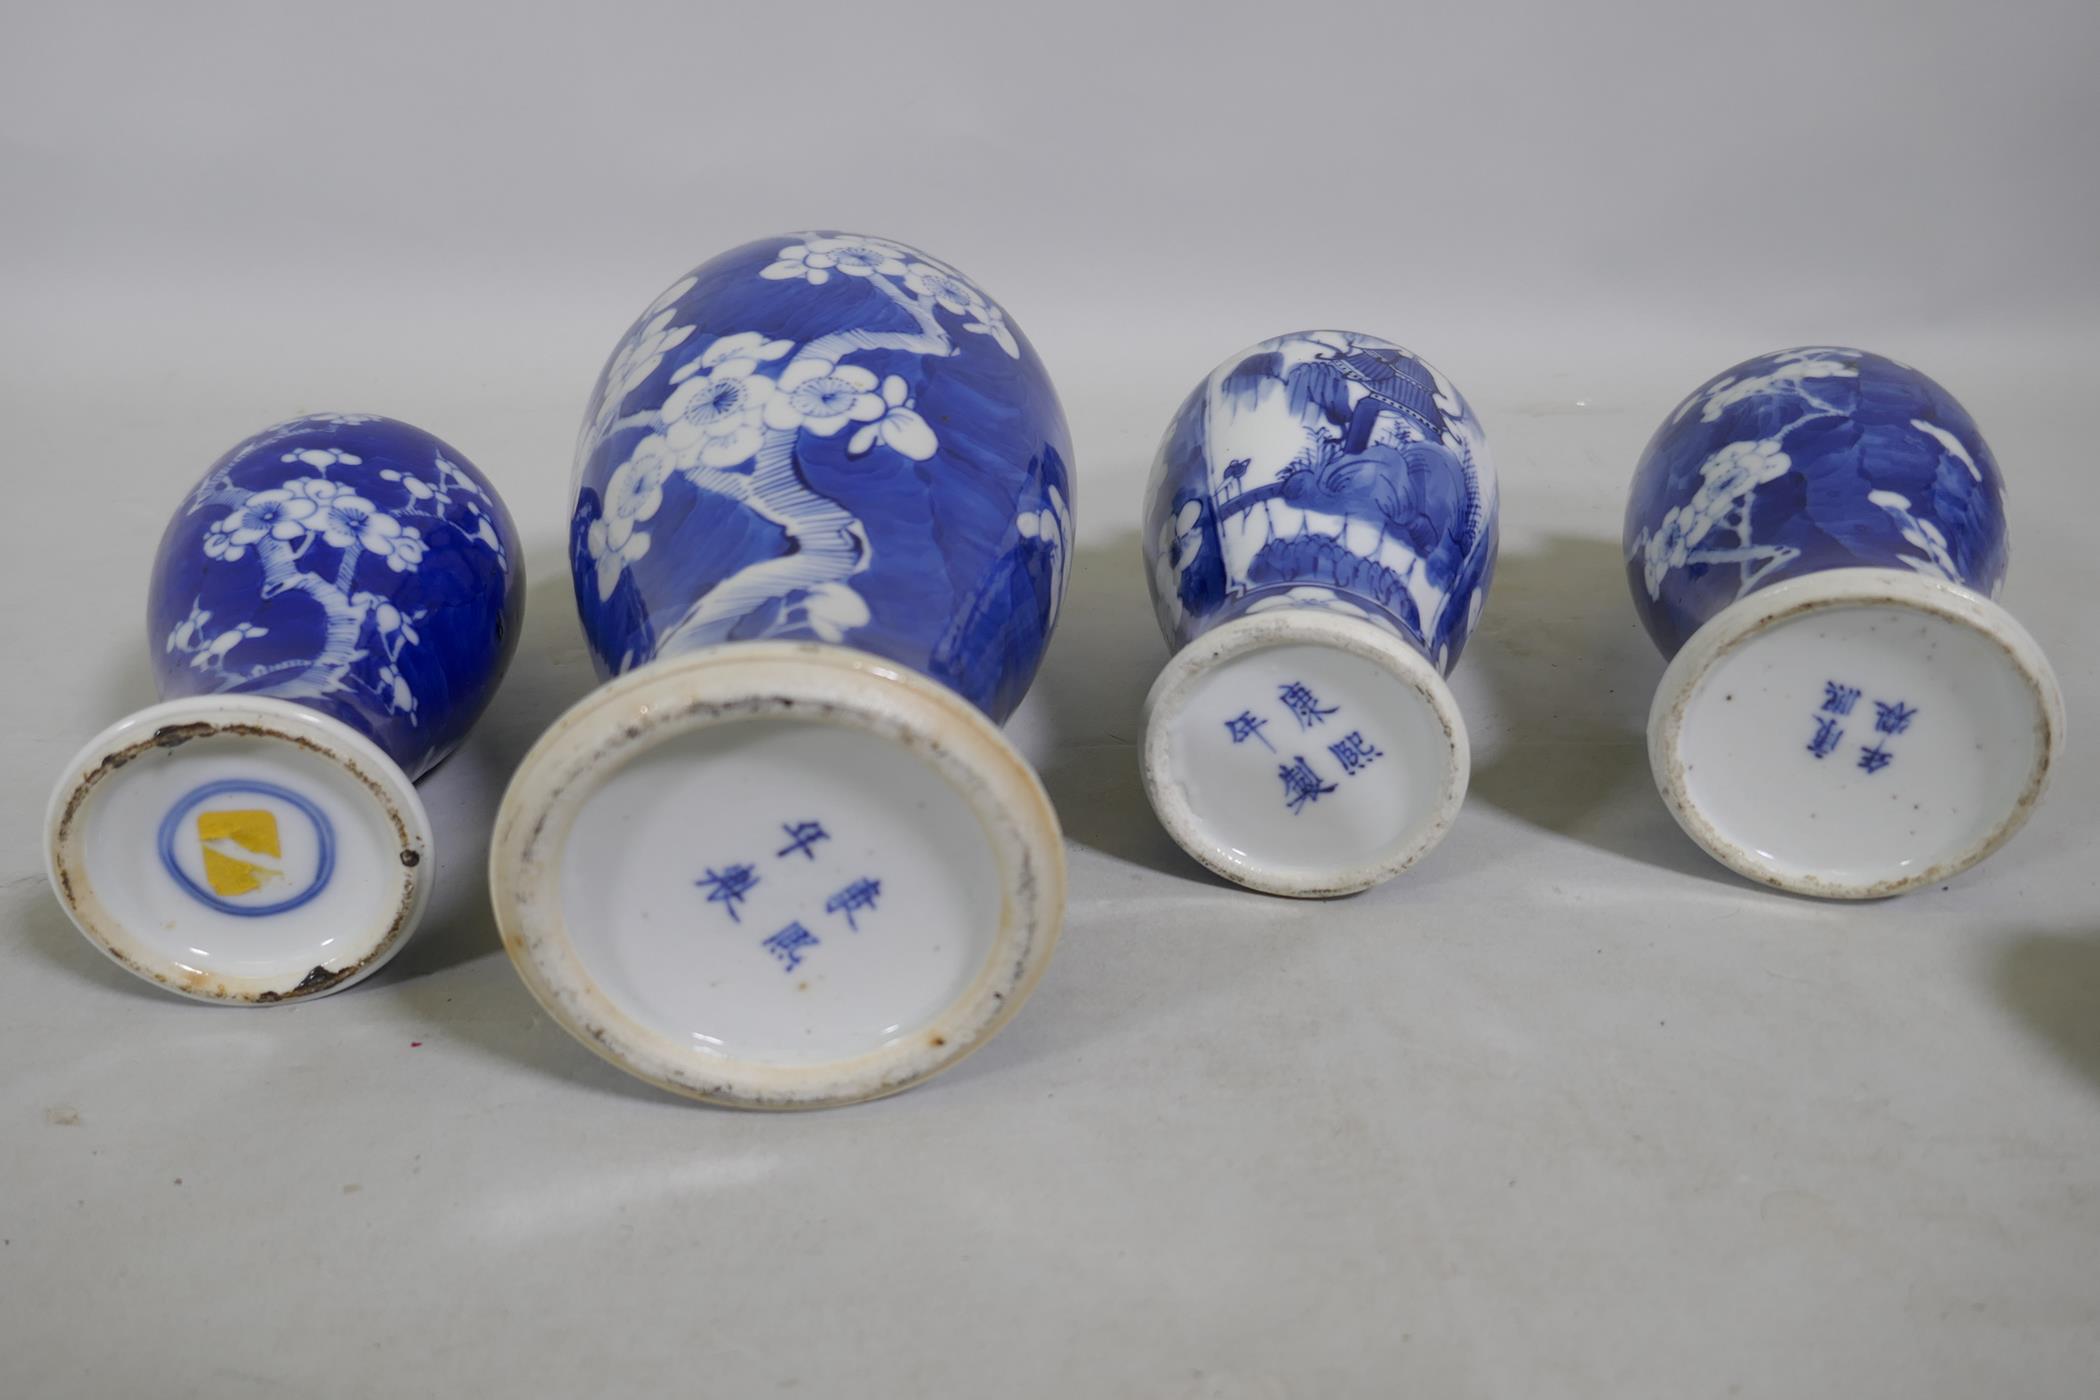 A collection of C19th Chinese blue and white vases with prunus on cracked ice decoration, mismatched - Image 3 of 6